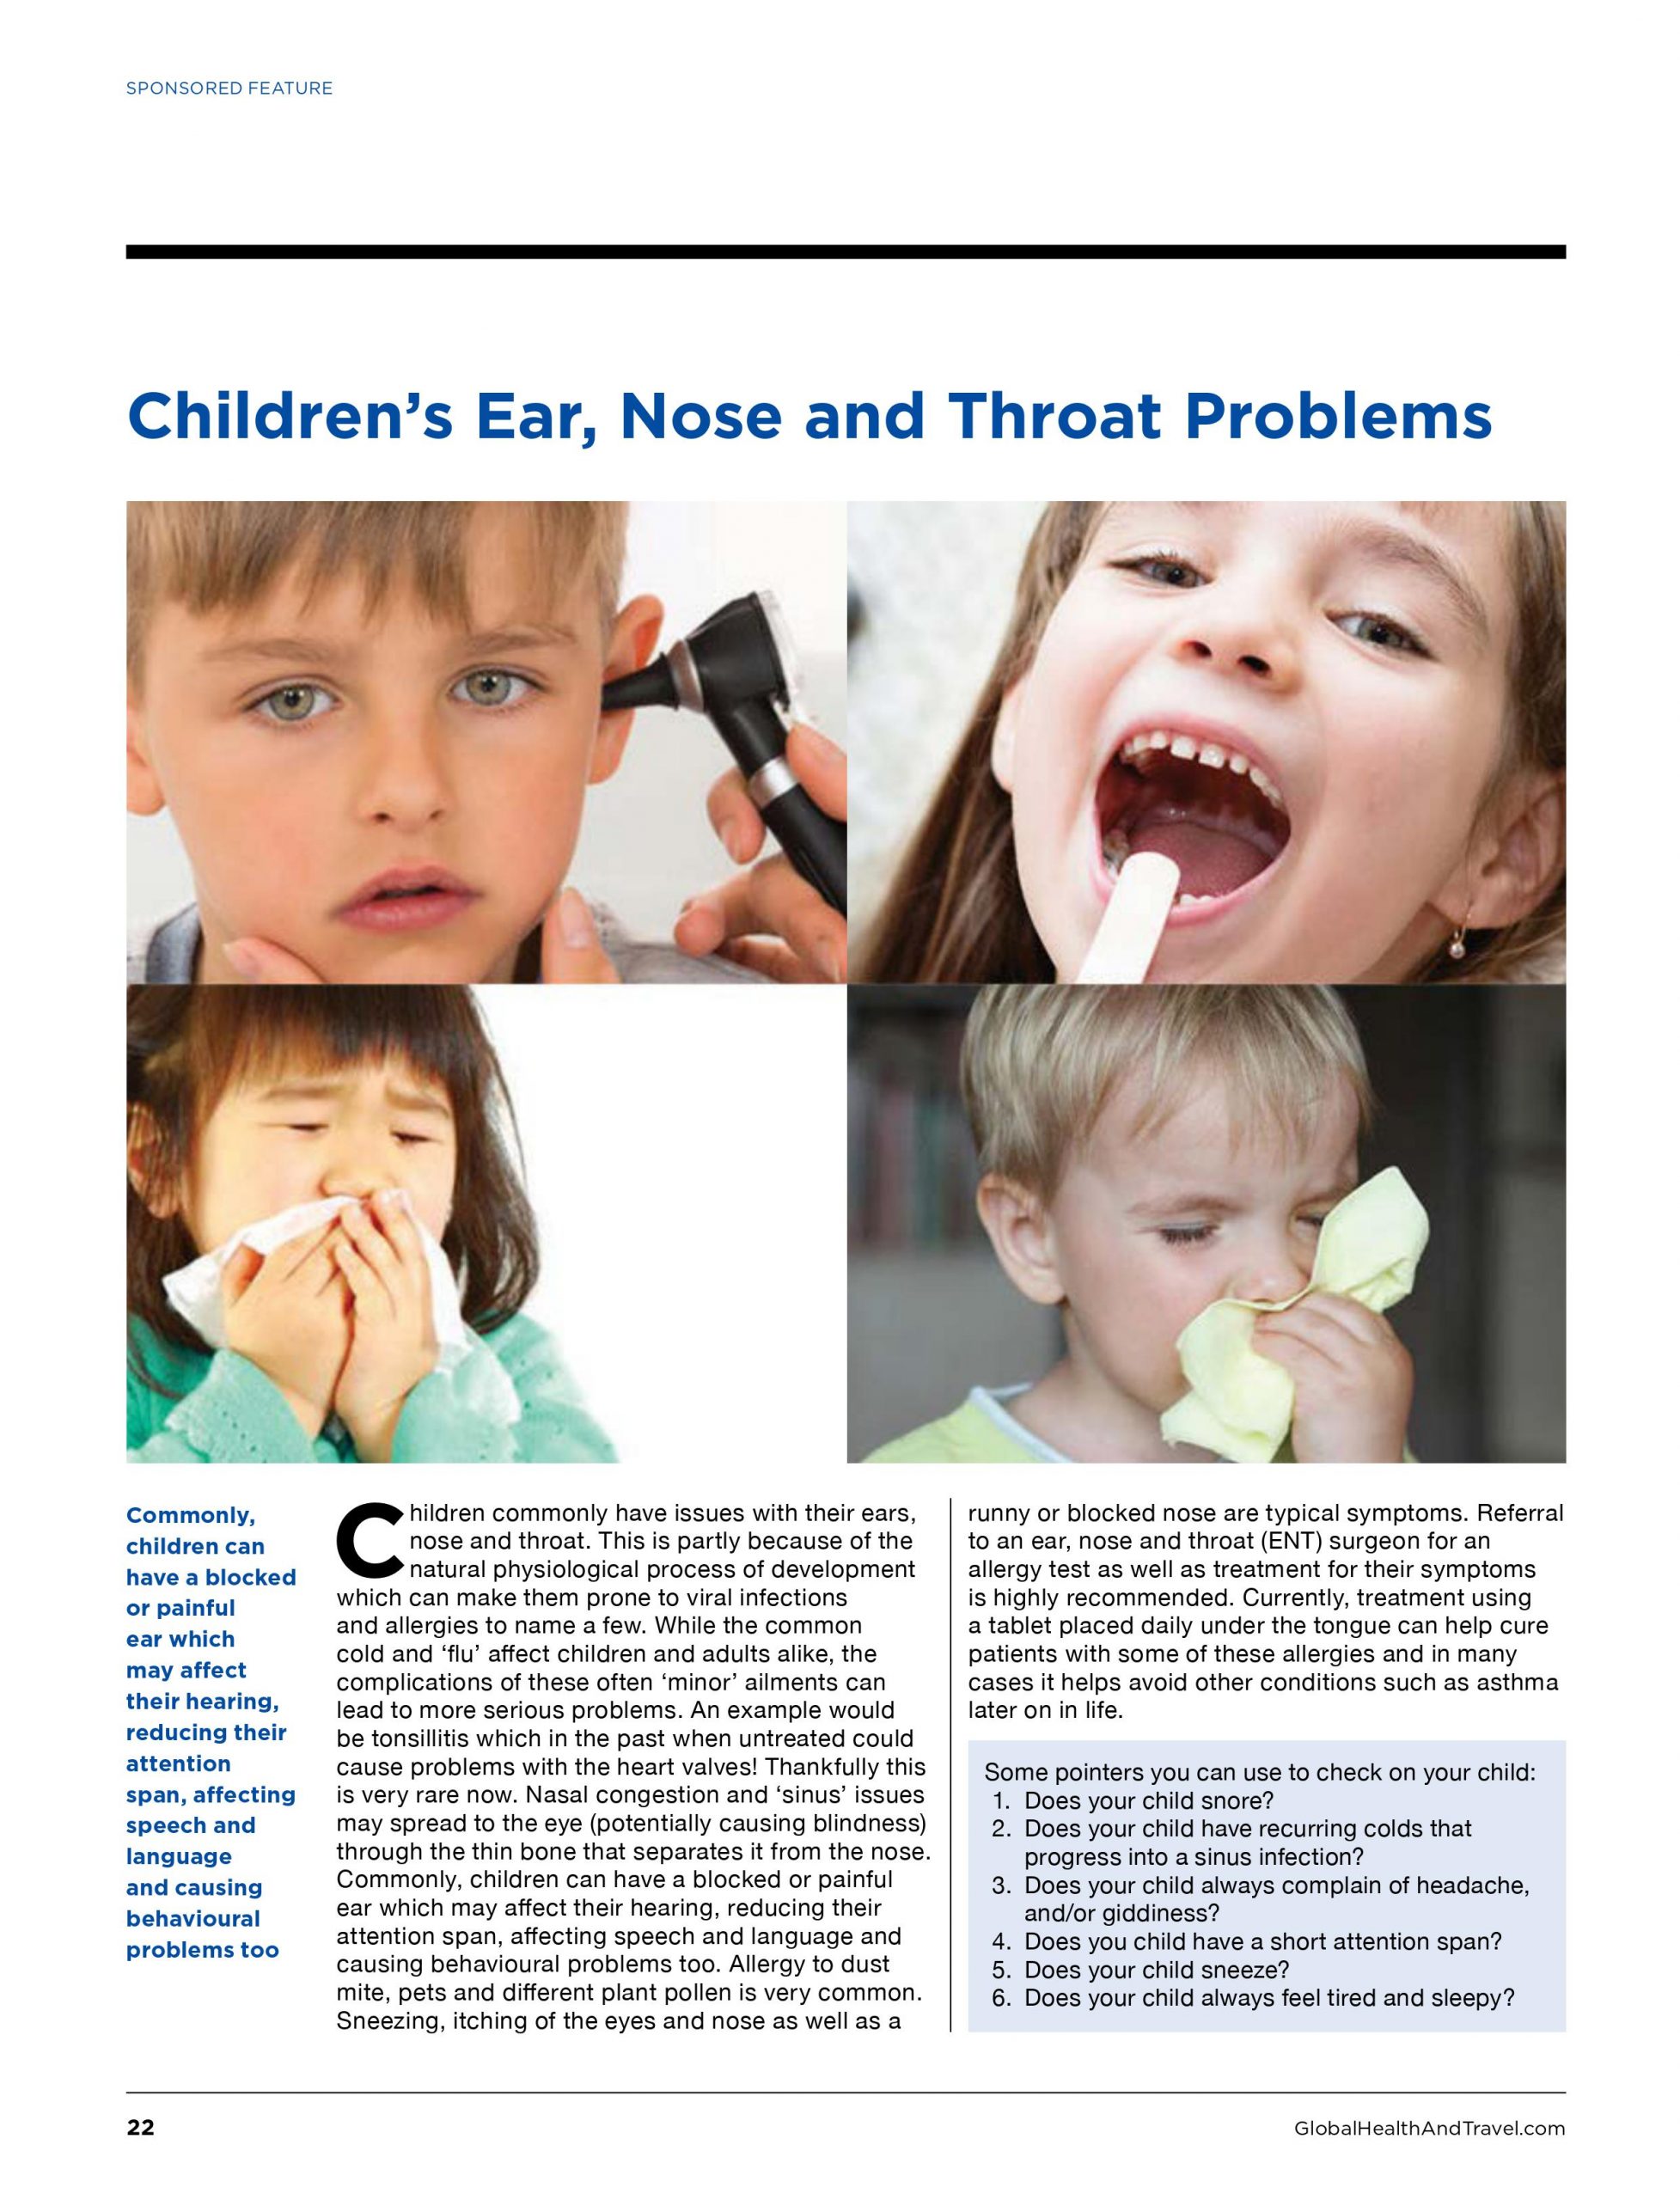 research topics on ear nose and throat